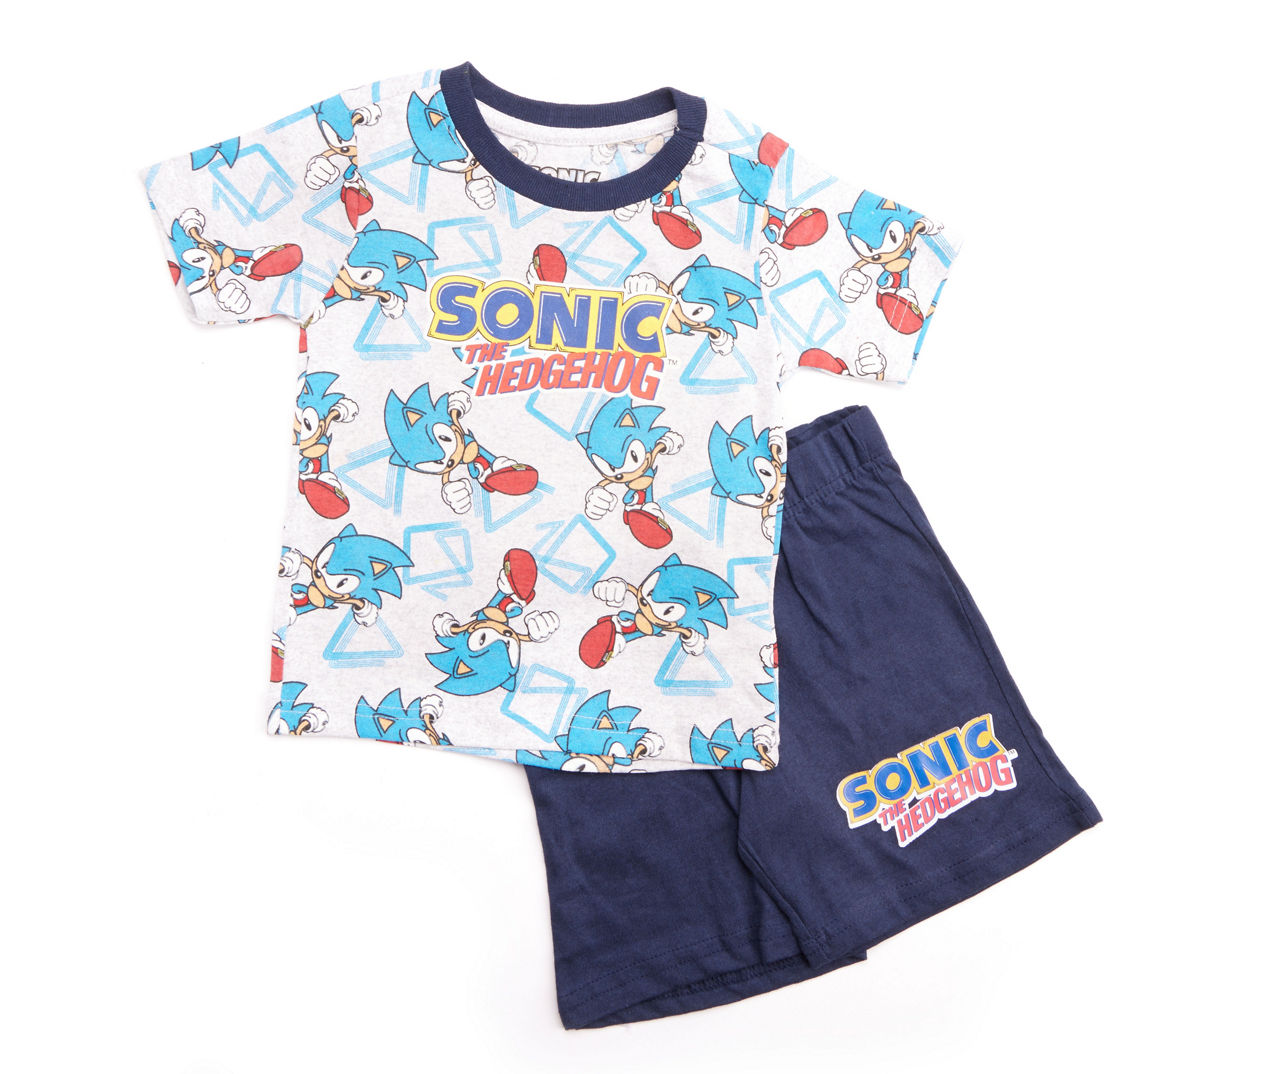 Toddler Size 4T Blue Sonic Tee & Shorts Set